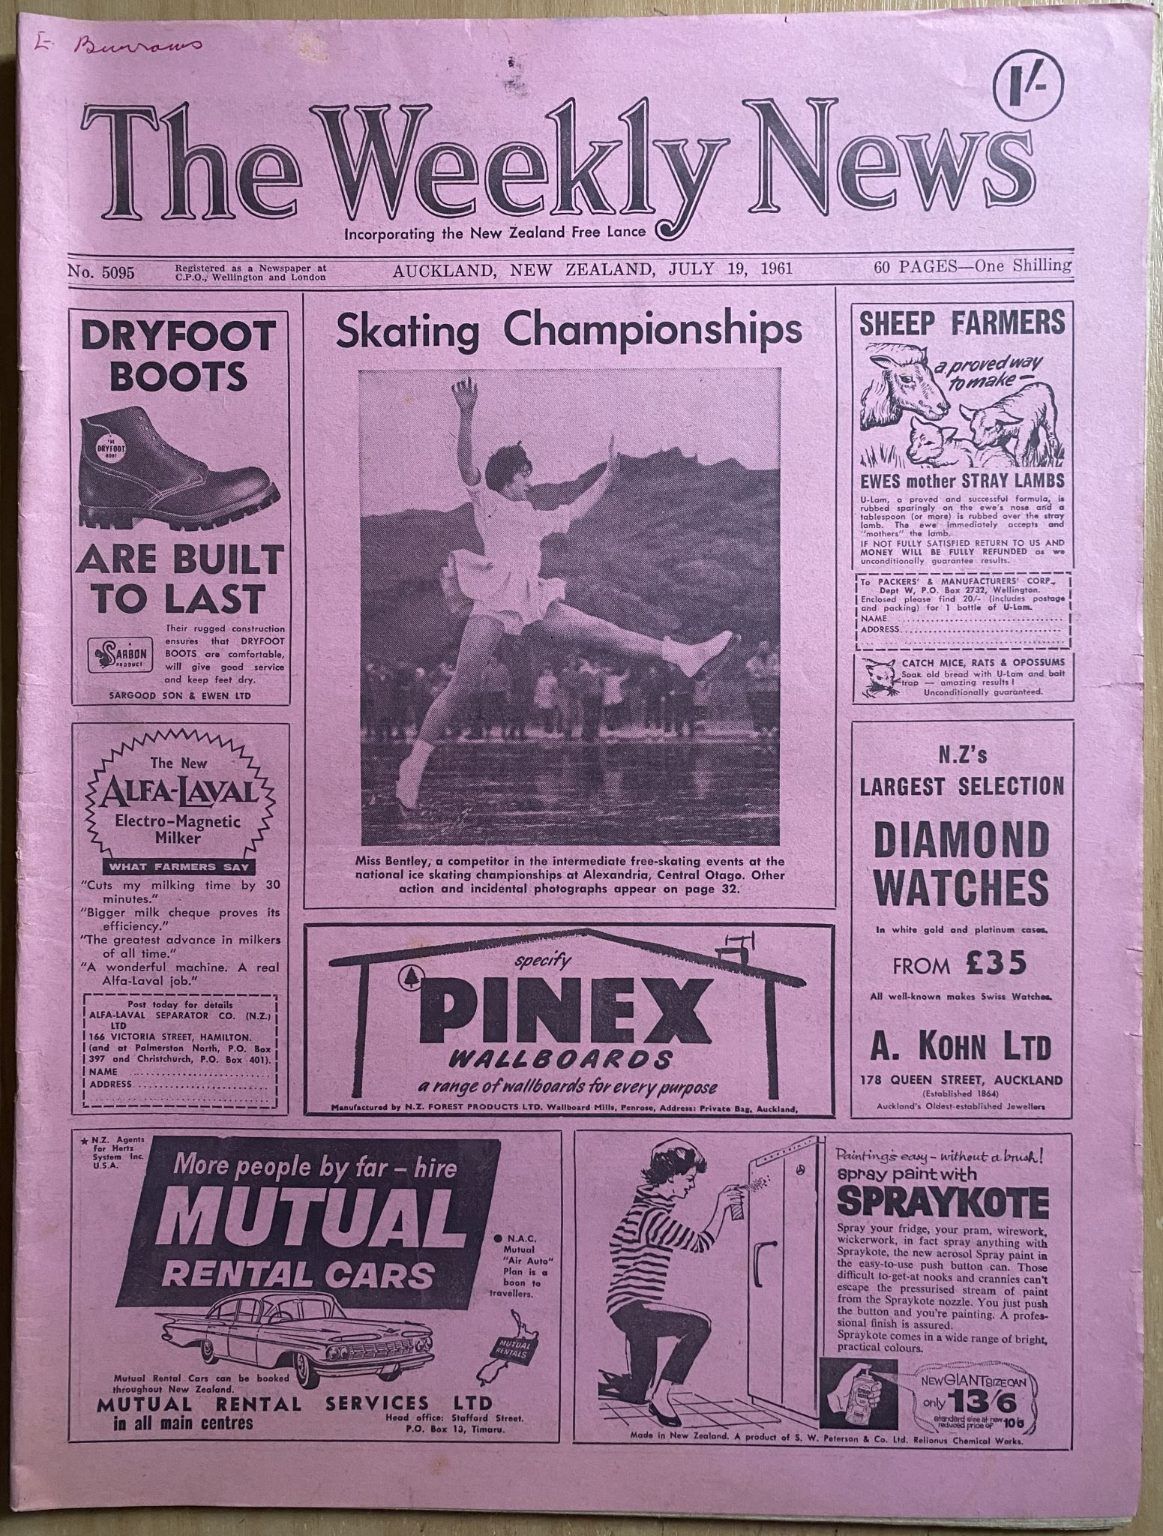 OLD NEWSPAPER: The Weekly News, No. 5095, 19 July 1961